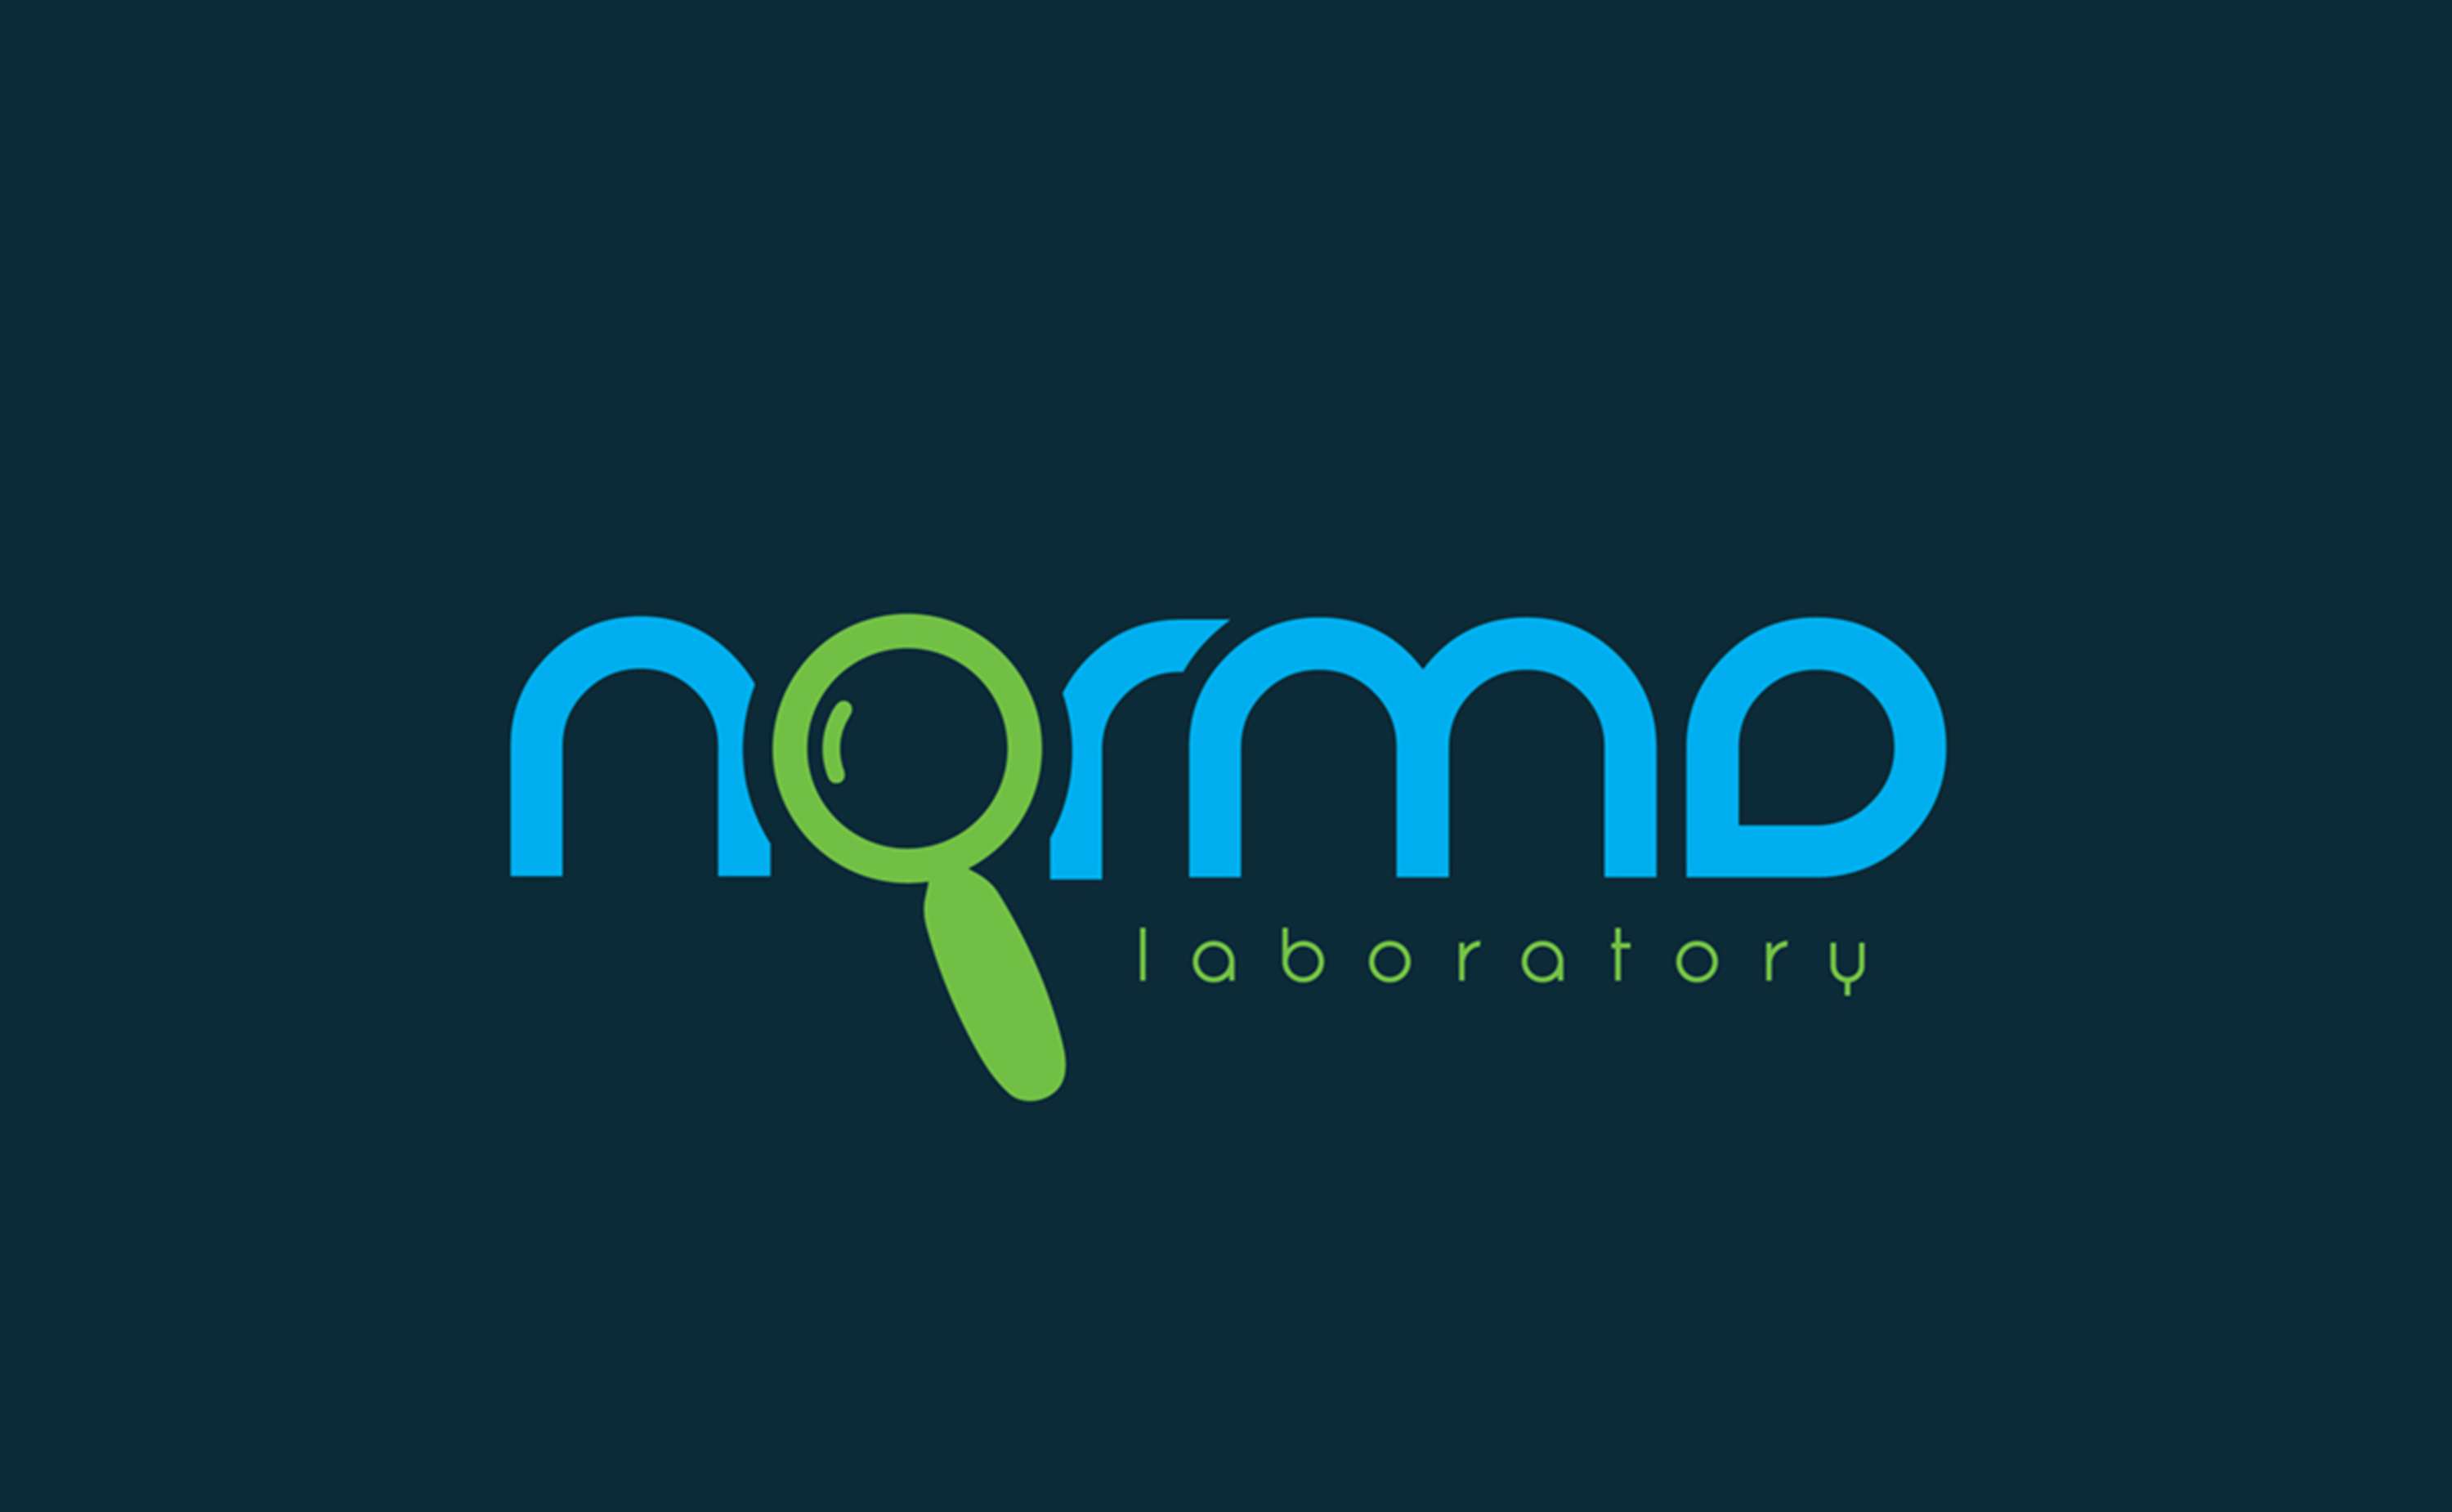 Norma Logo - Norma Laboratory -logo and branding design | The Dots